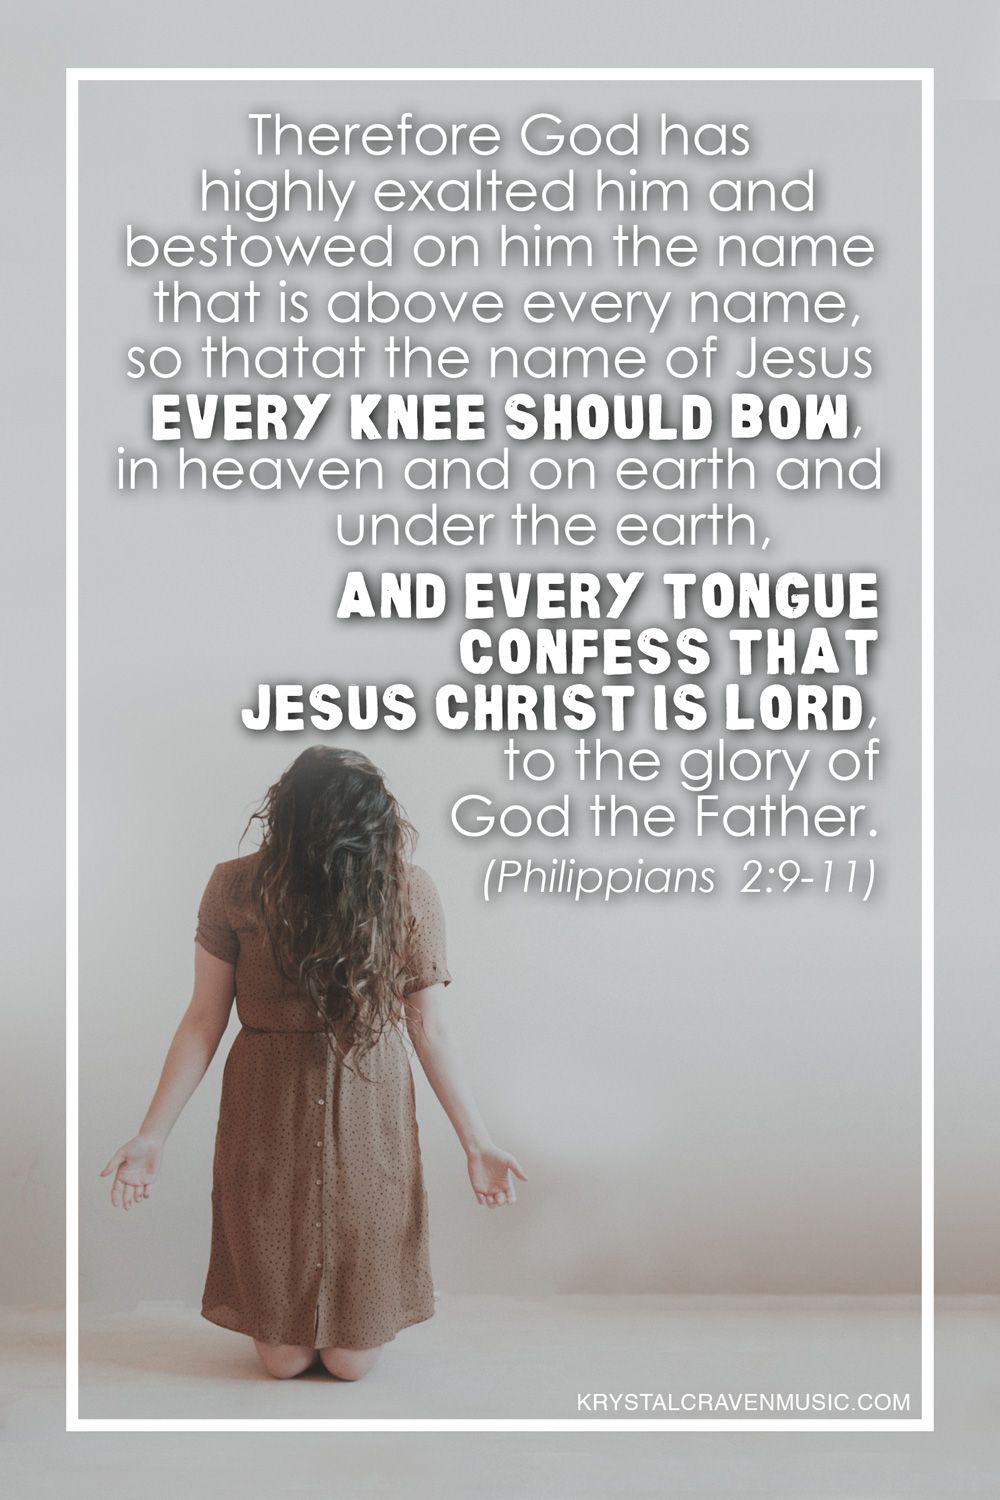 The Bible verse text from Philippians 2:9-11 "Therefore God has highly exalted him and bestowed on him the name that is above every name, so that at the name of Jesus every knee should bow, in heaven and on earth and under the earth, and every tongue confess that Jesus Christ is Lord, to the glory of God the Father" overlaying a woman in a brown dress with her head bowed and her hair covering her face as she's on her knees and holding her open hands out to her sides.